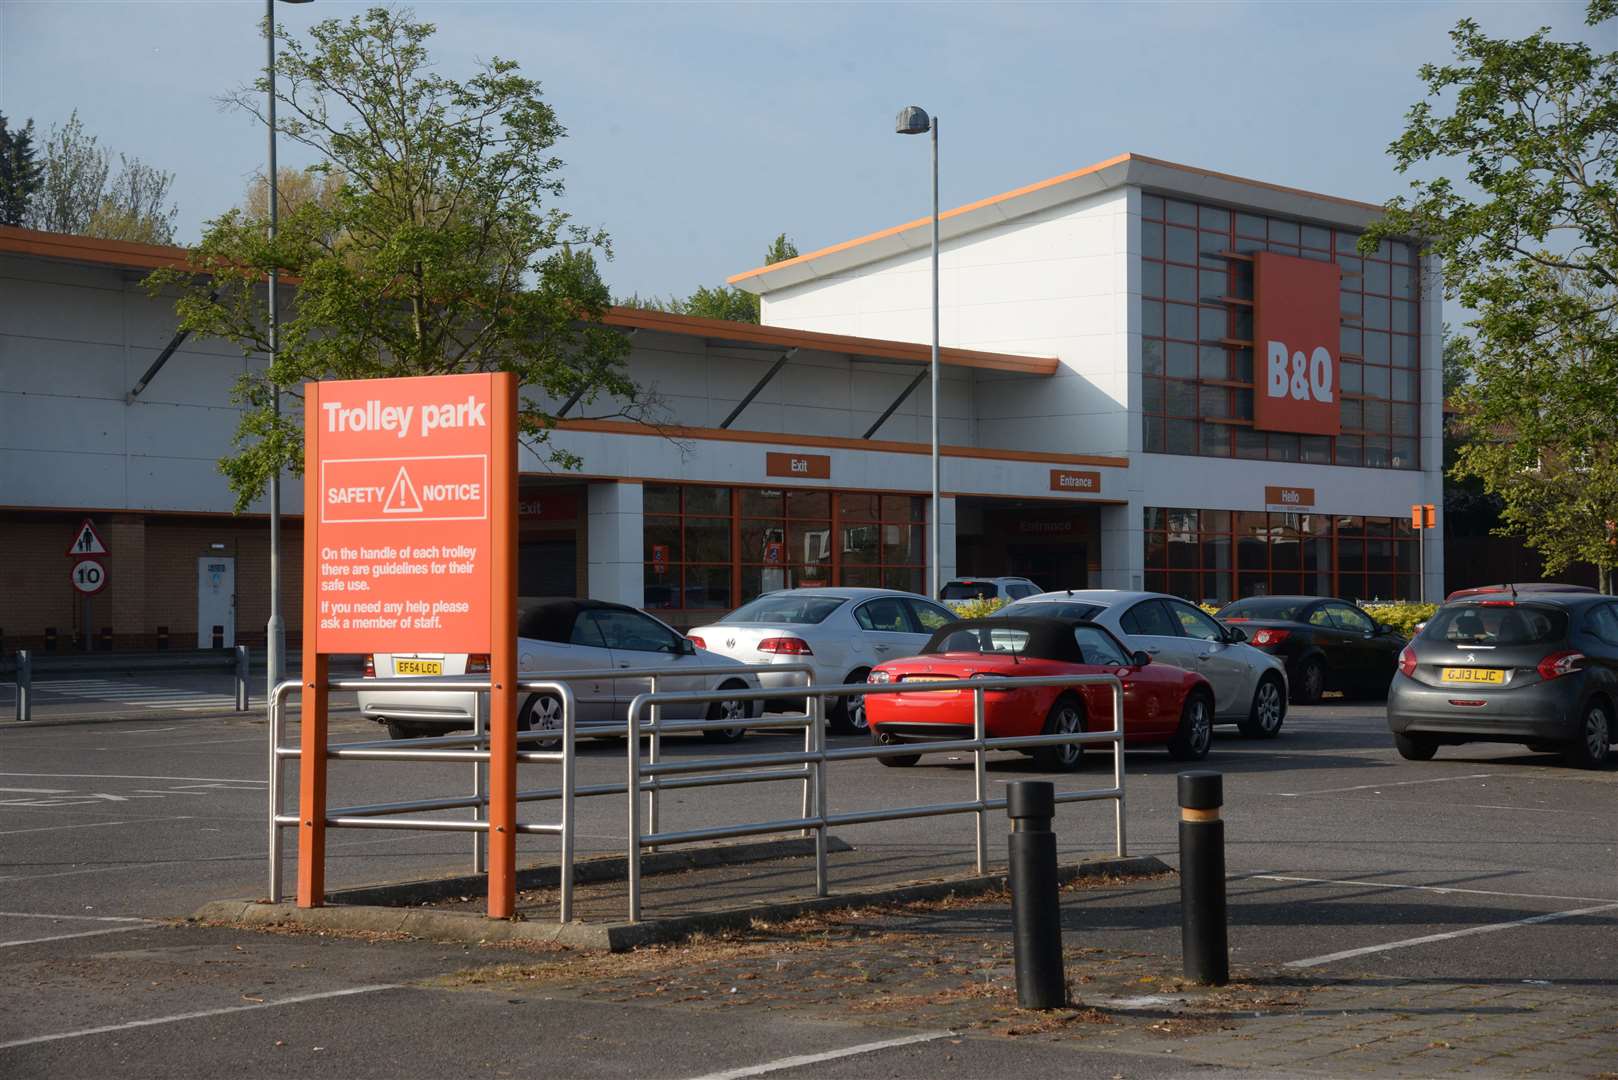 The B&Q store in Sturry Road, Canterbury